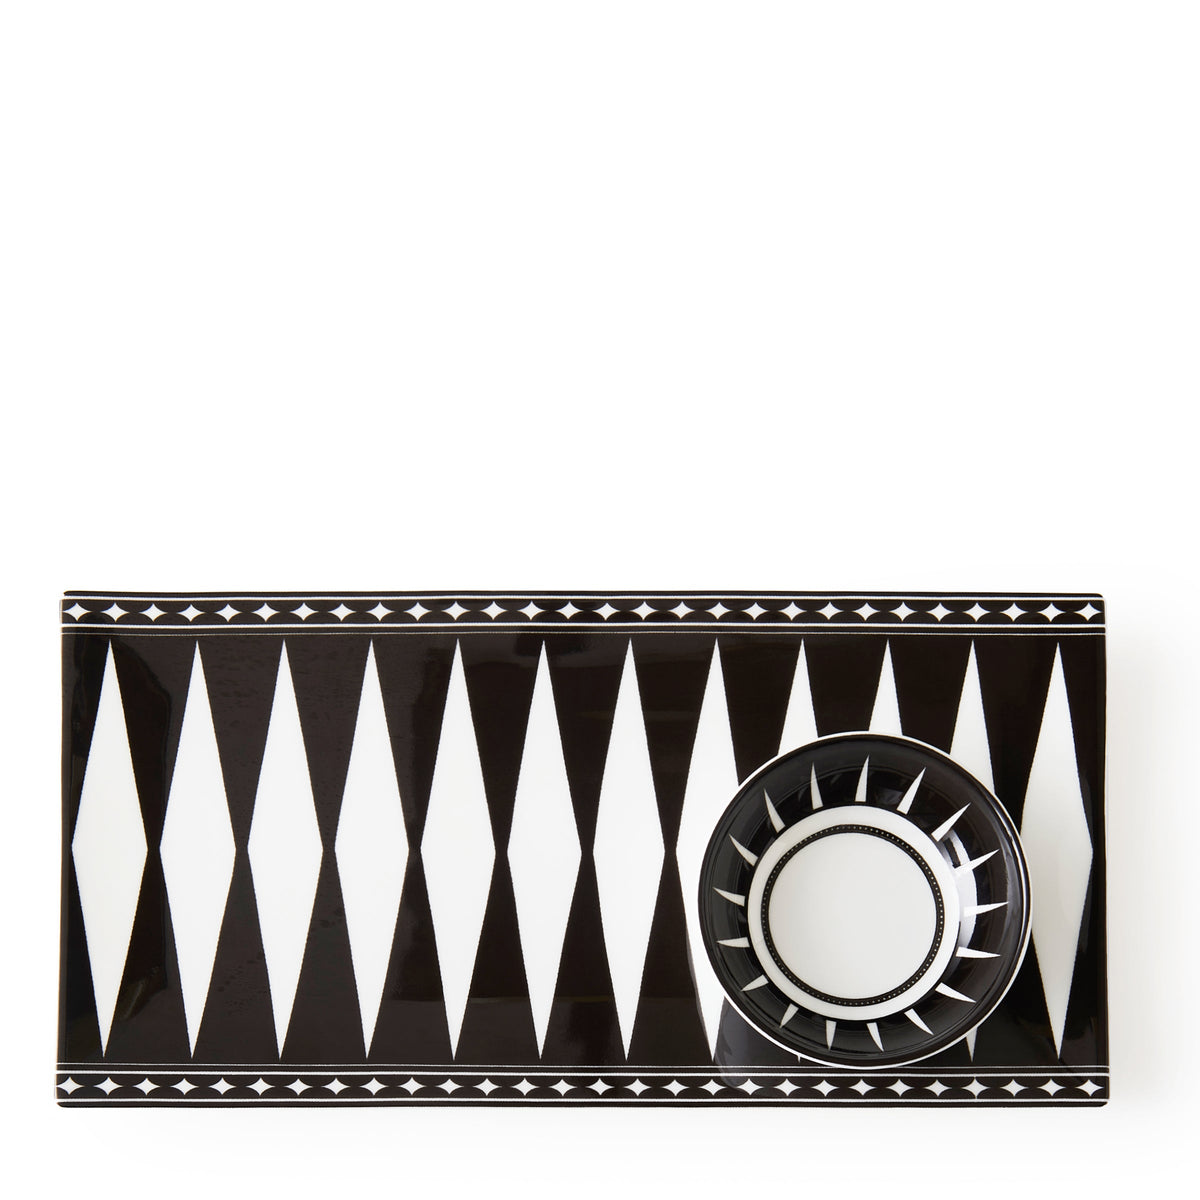 A rectangular black and white tray with a geometric diamond pattern, reminiscent of Art Deco style, holds a matching small bowl with a similar design from the Marrakech Dipping Dishes, Set of 4 by Caskata.